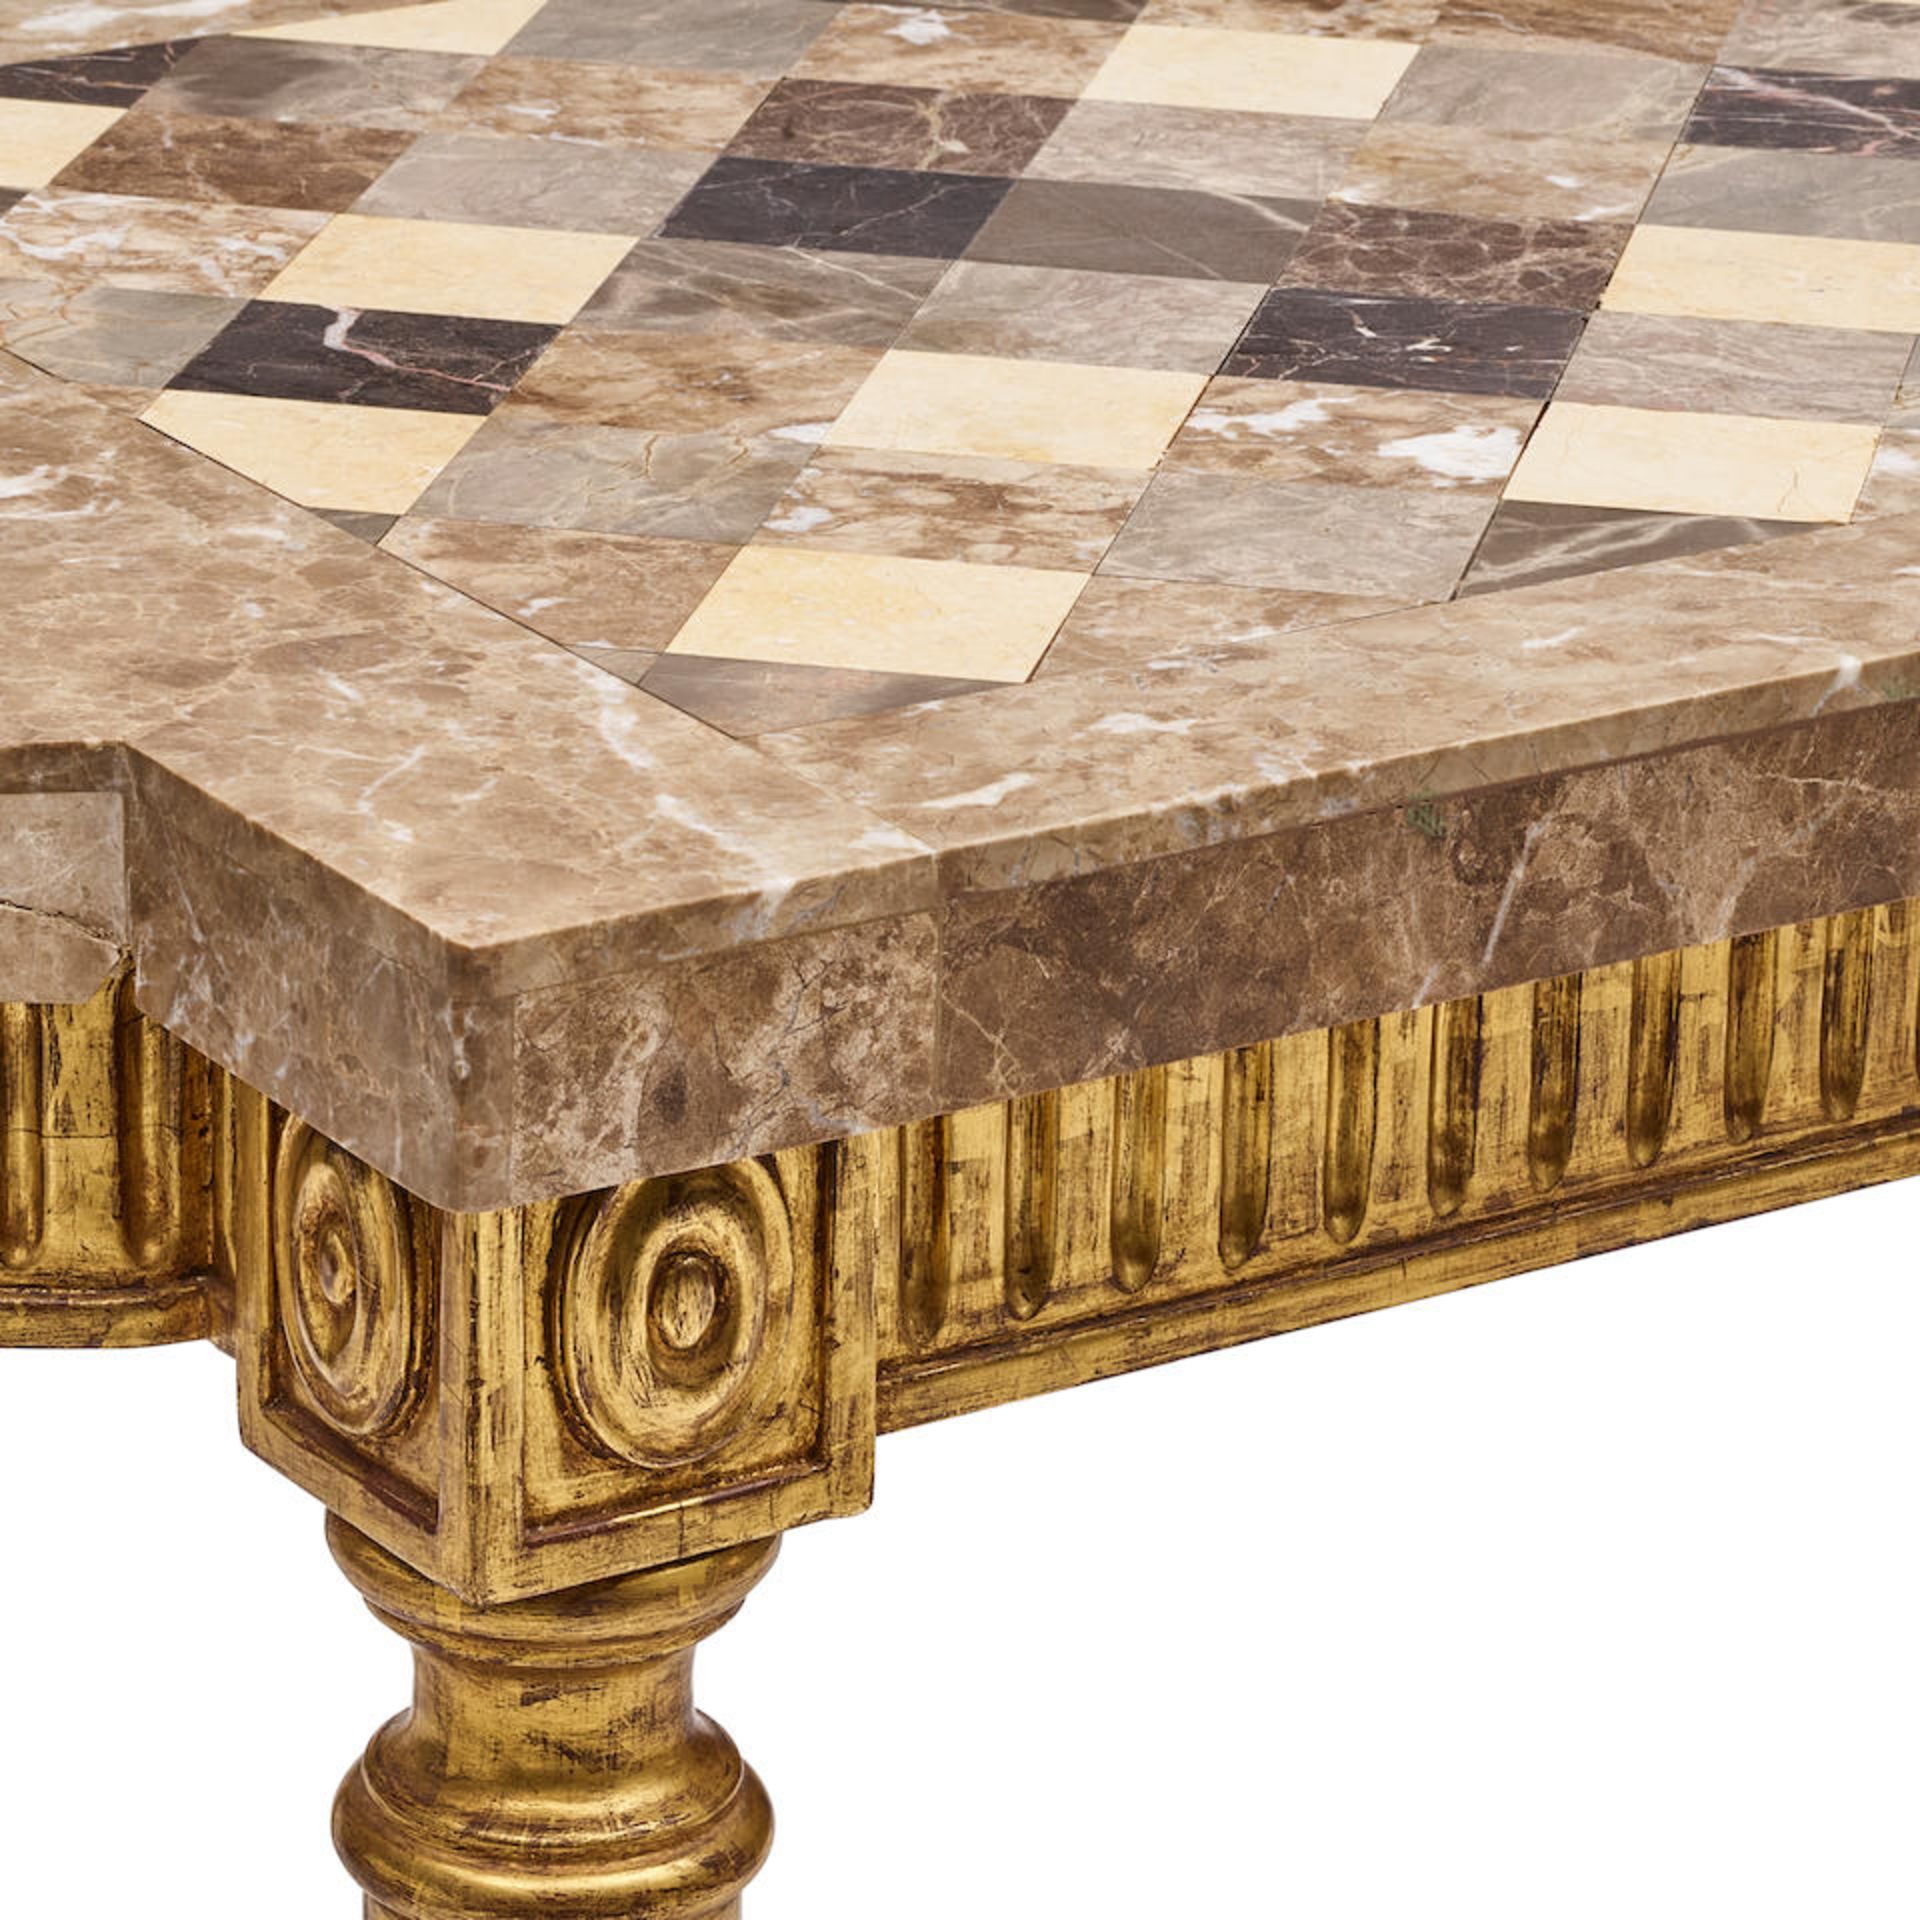 A NEOCLASSICAL STYLE STONE AND VENEERED MARBLE TOP GILTWOOD CONSOLEContemporary - Image 2 of 2